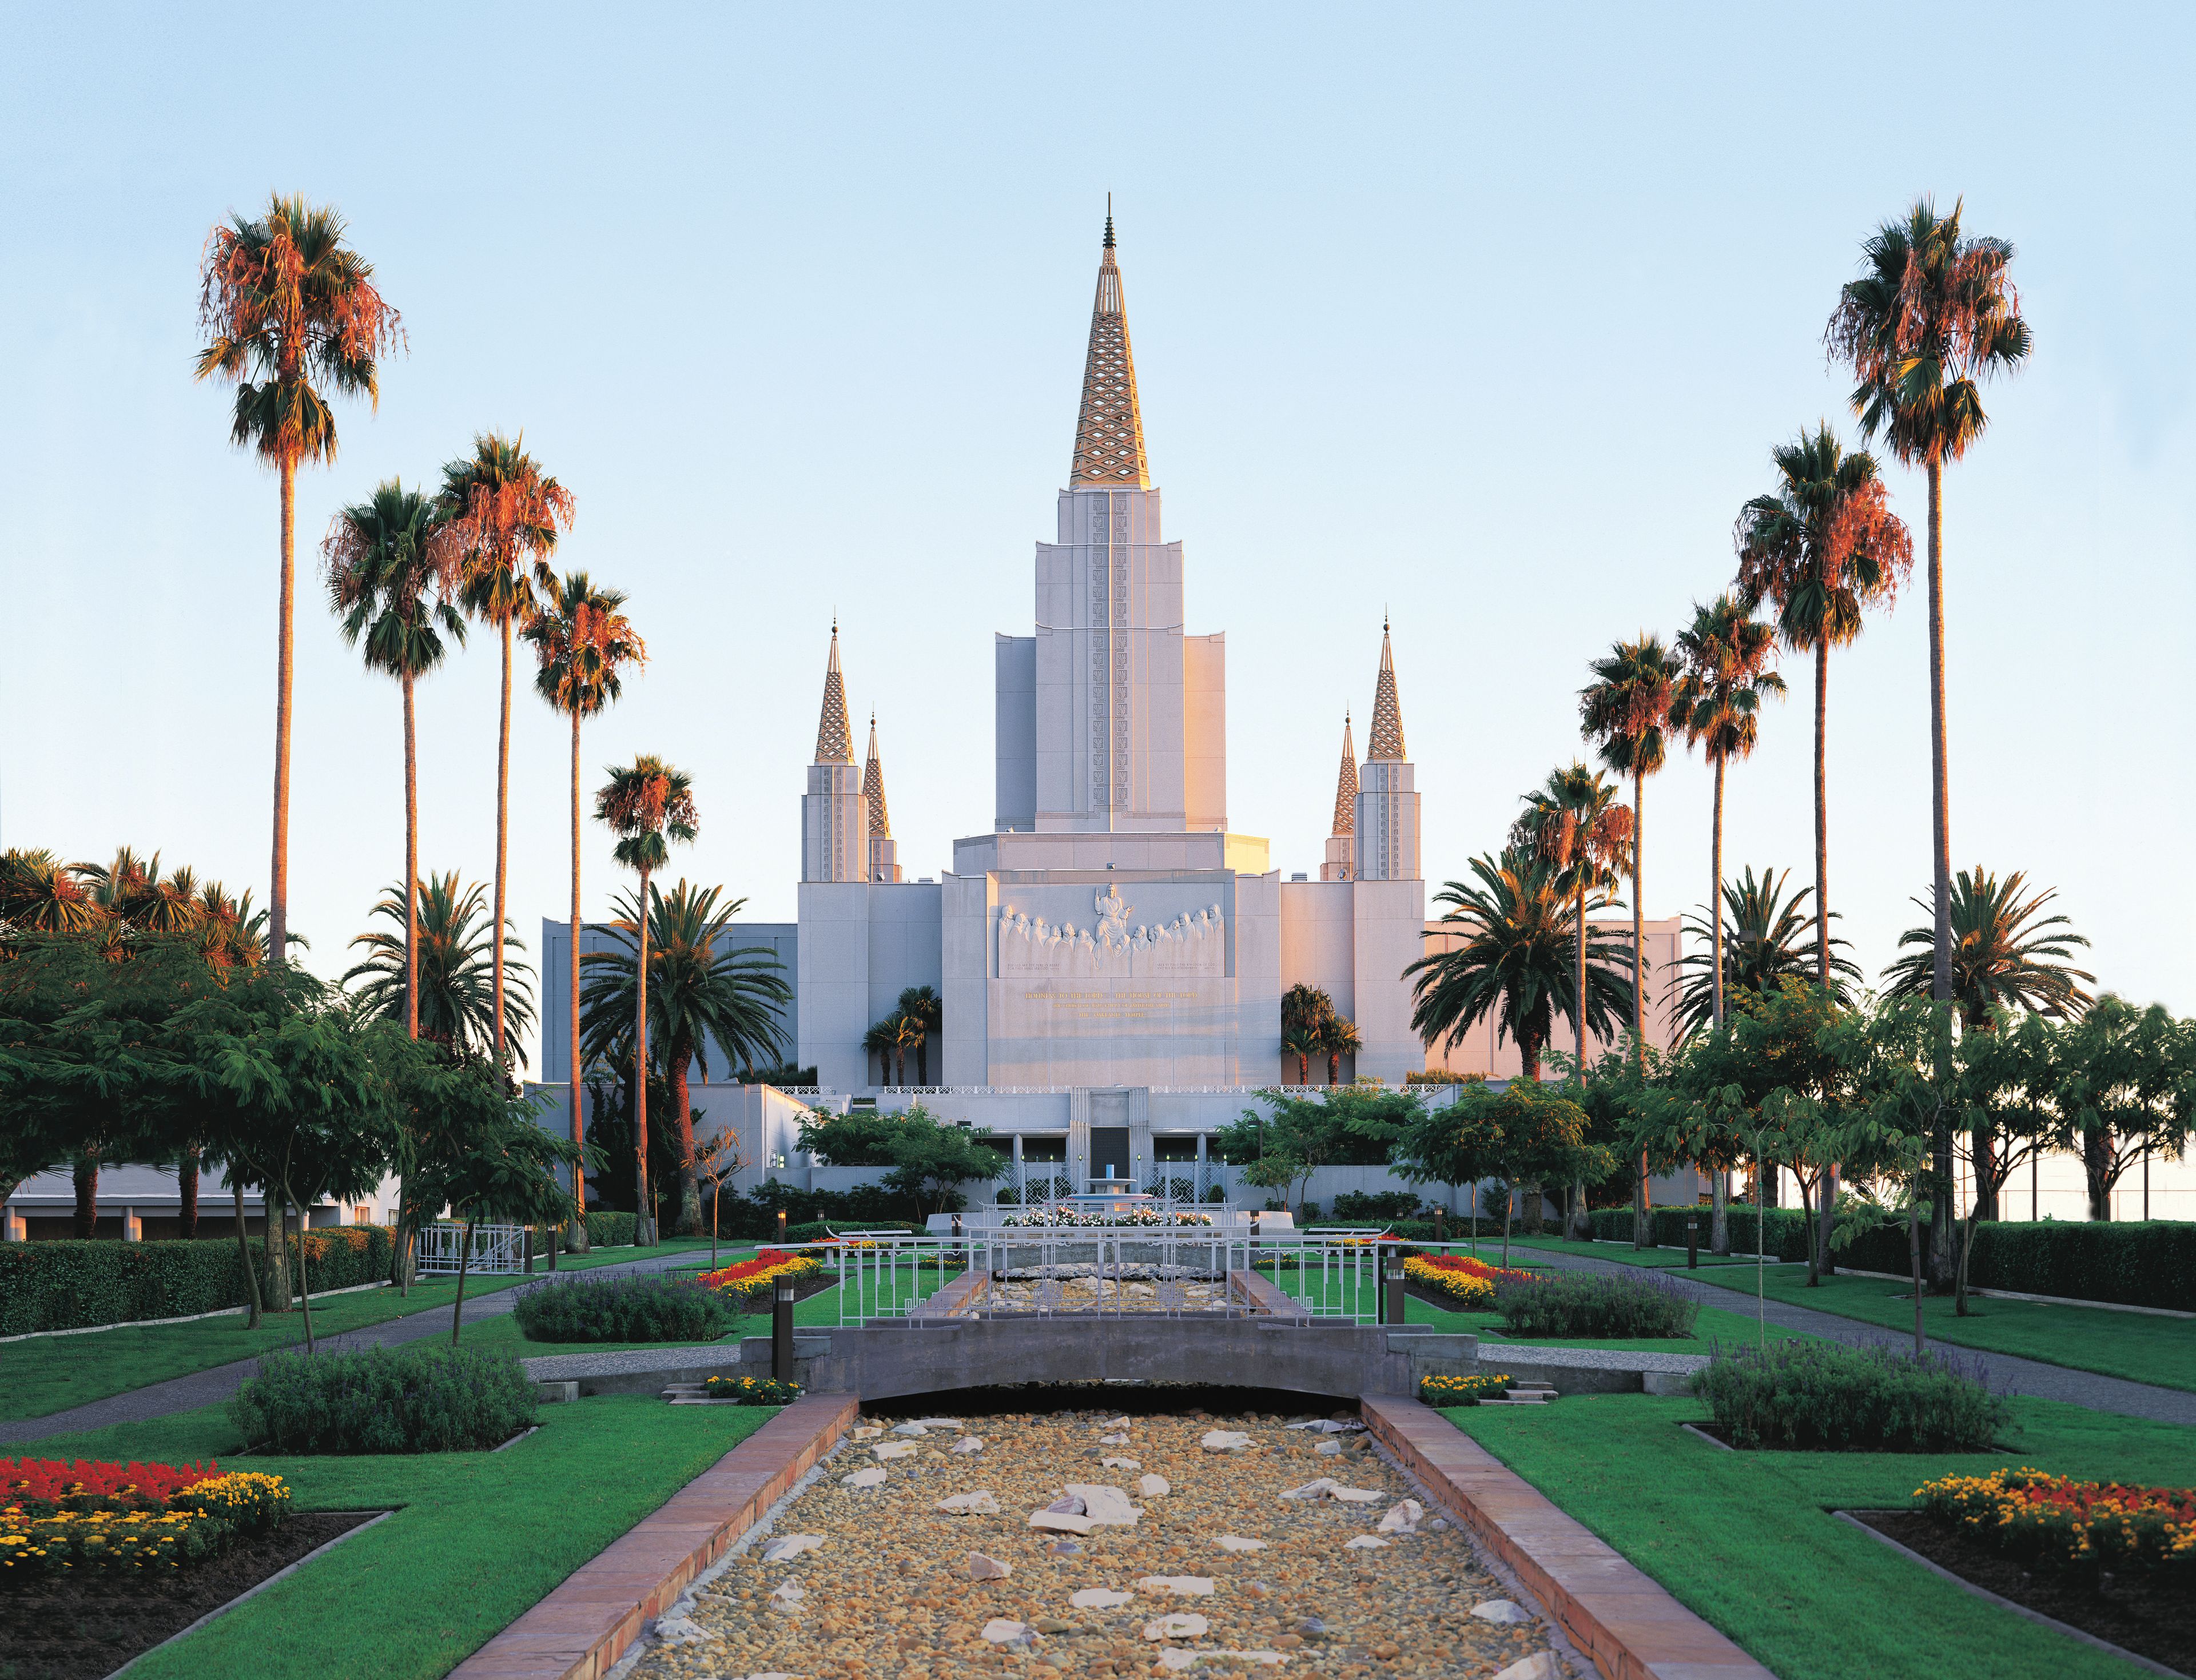 The front of the Oakland California Temple on a sunny day.